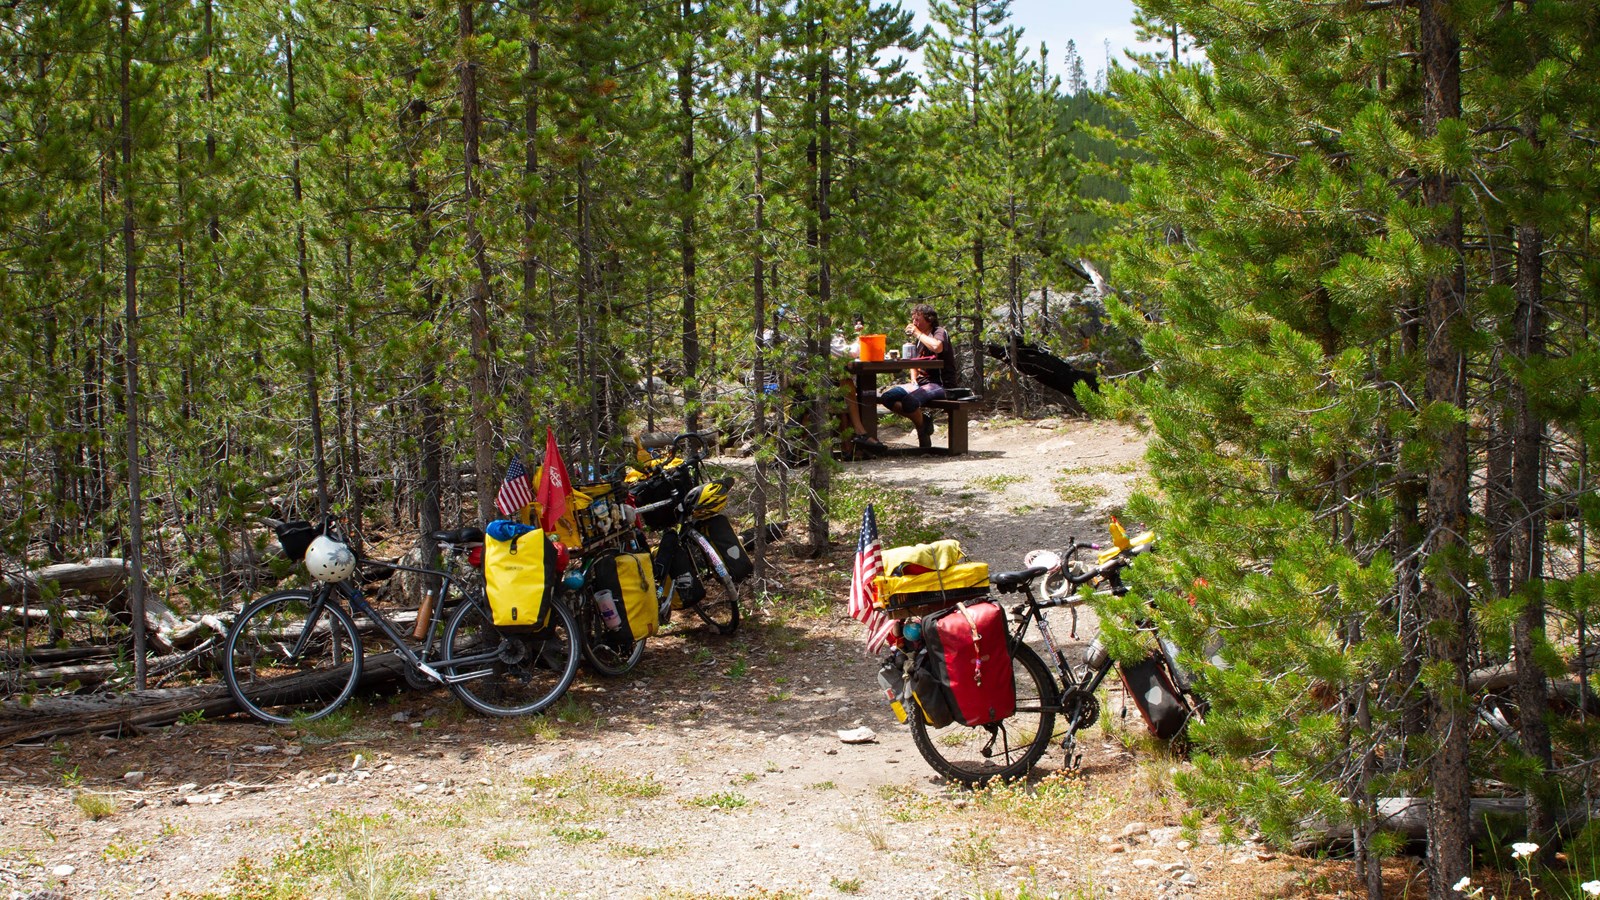 Bikes parked on the edge of a forested area where people are picnicking at table